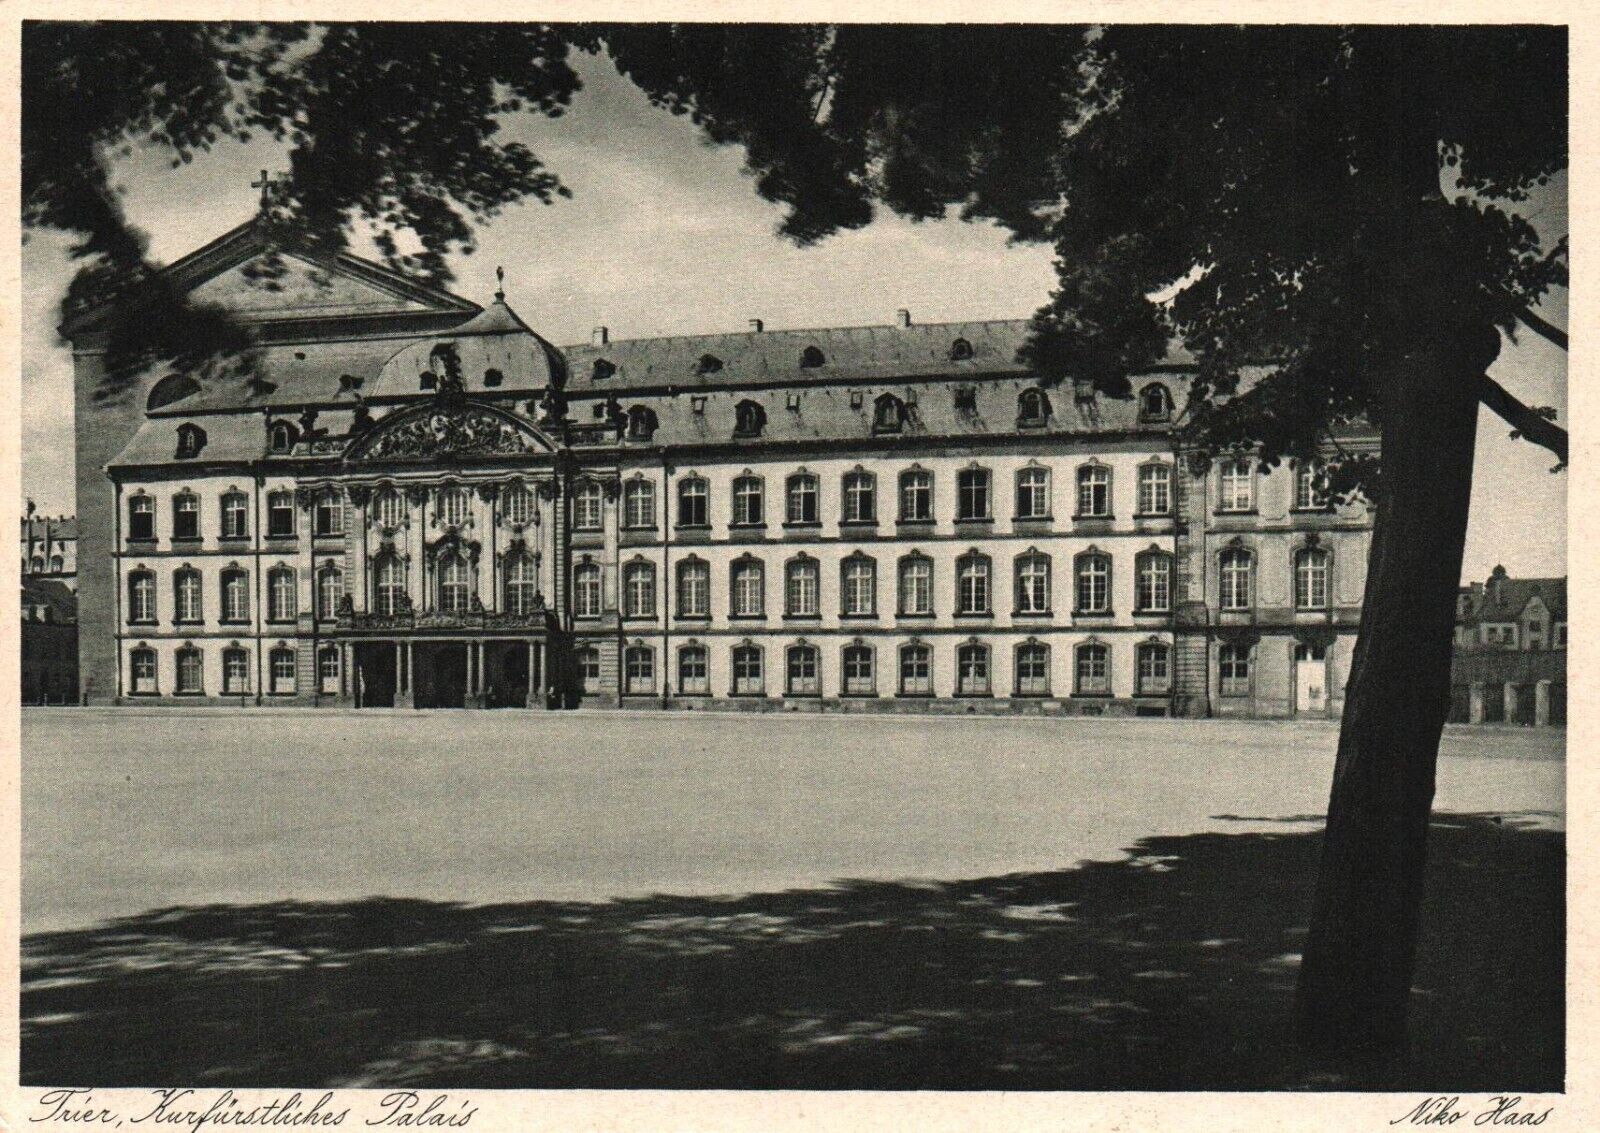 Electoral Palace Trier Photo By Niko Haas Vintage Postcard Unposted